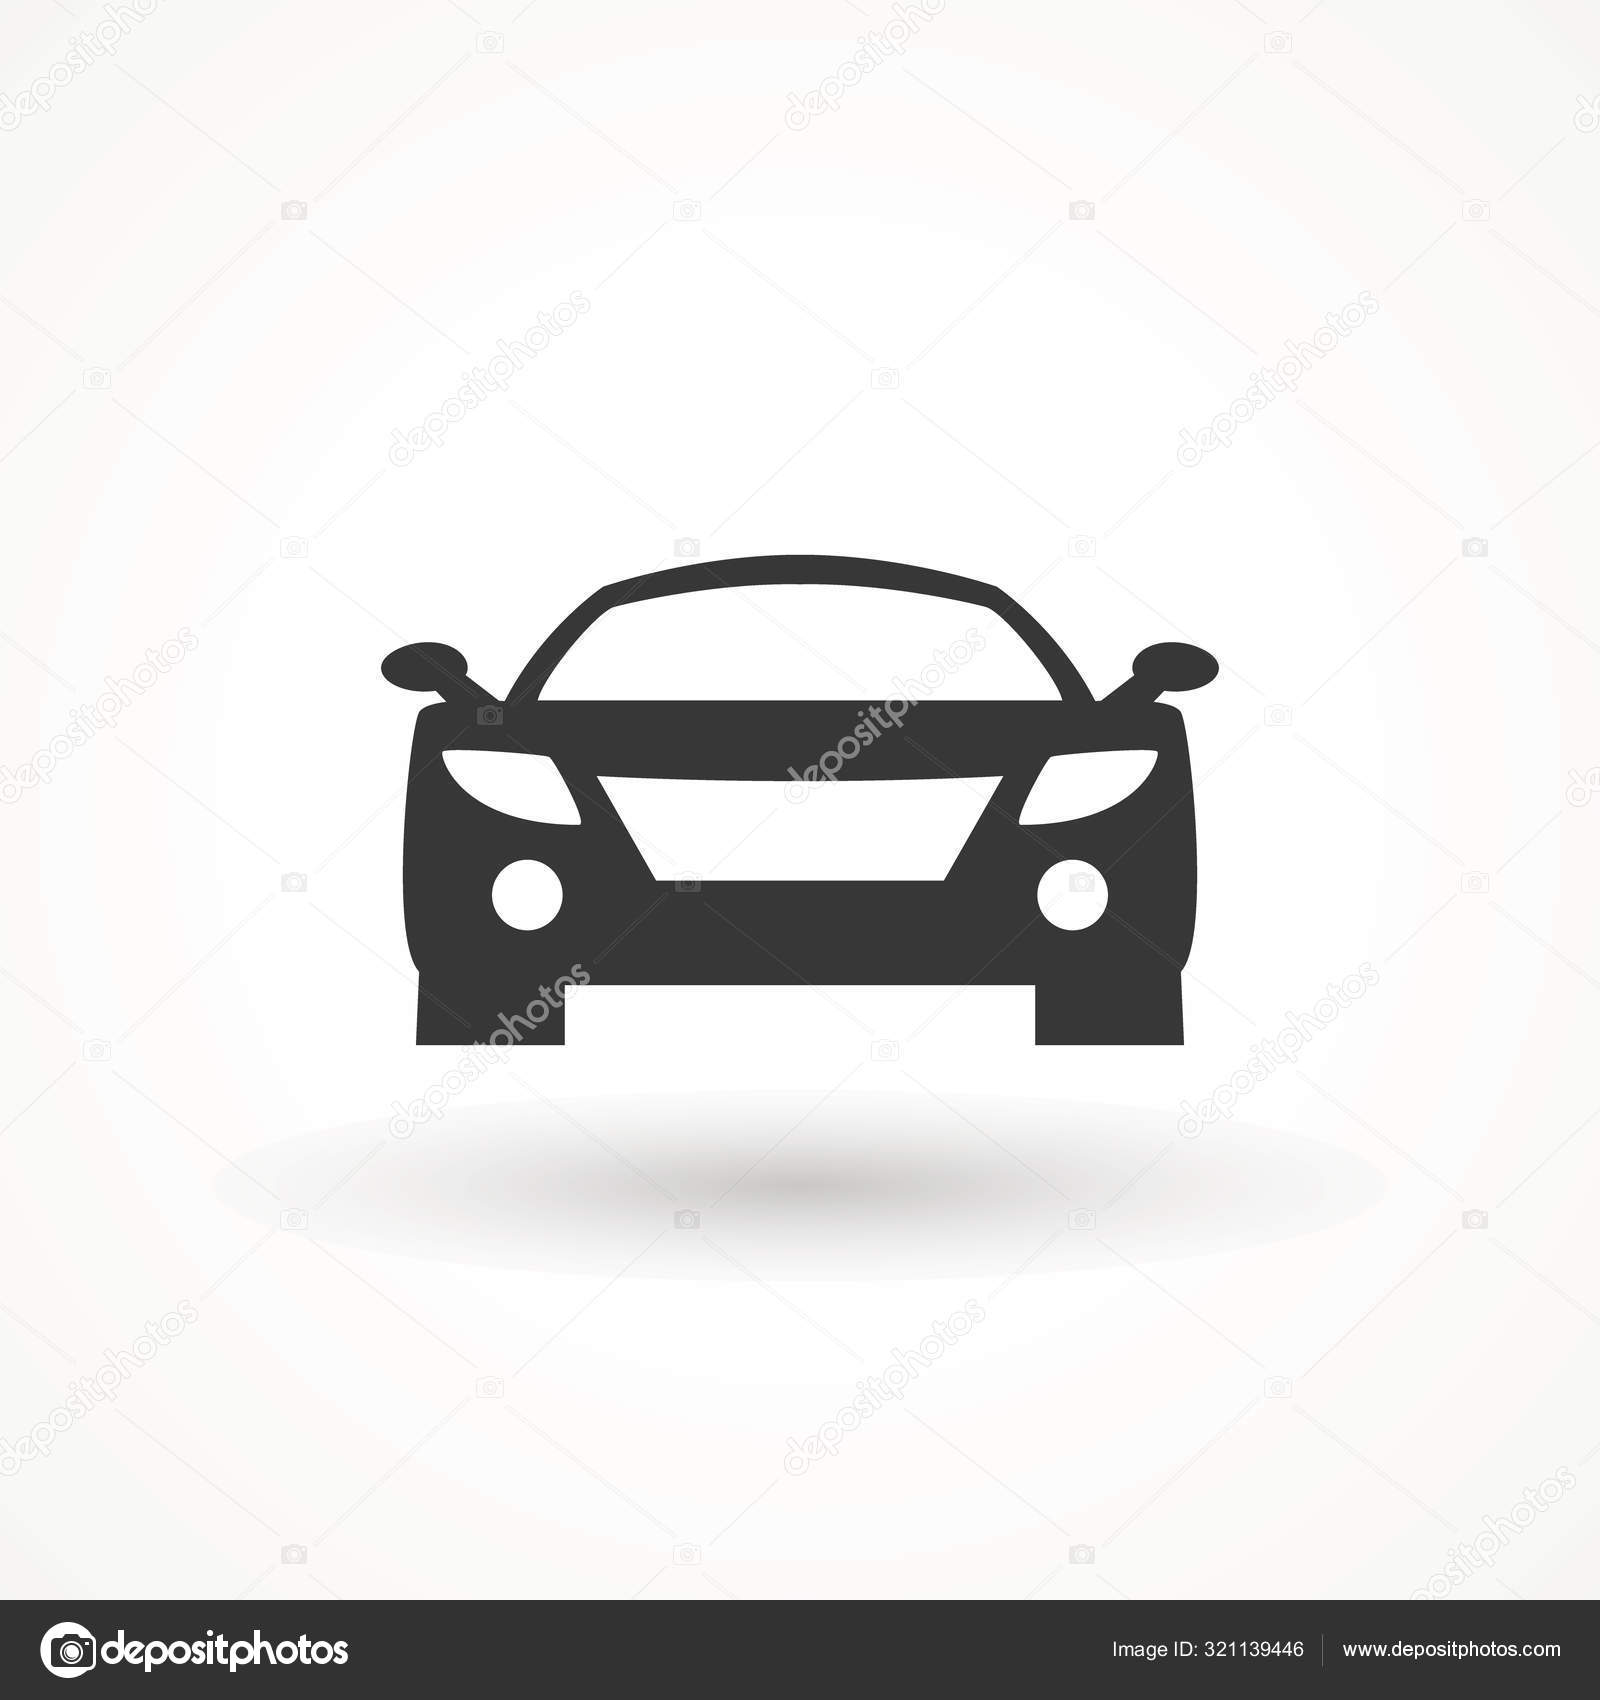 Car vector icon. Isolated simple view front logo illustration